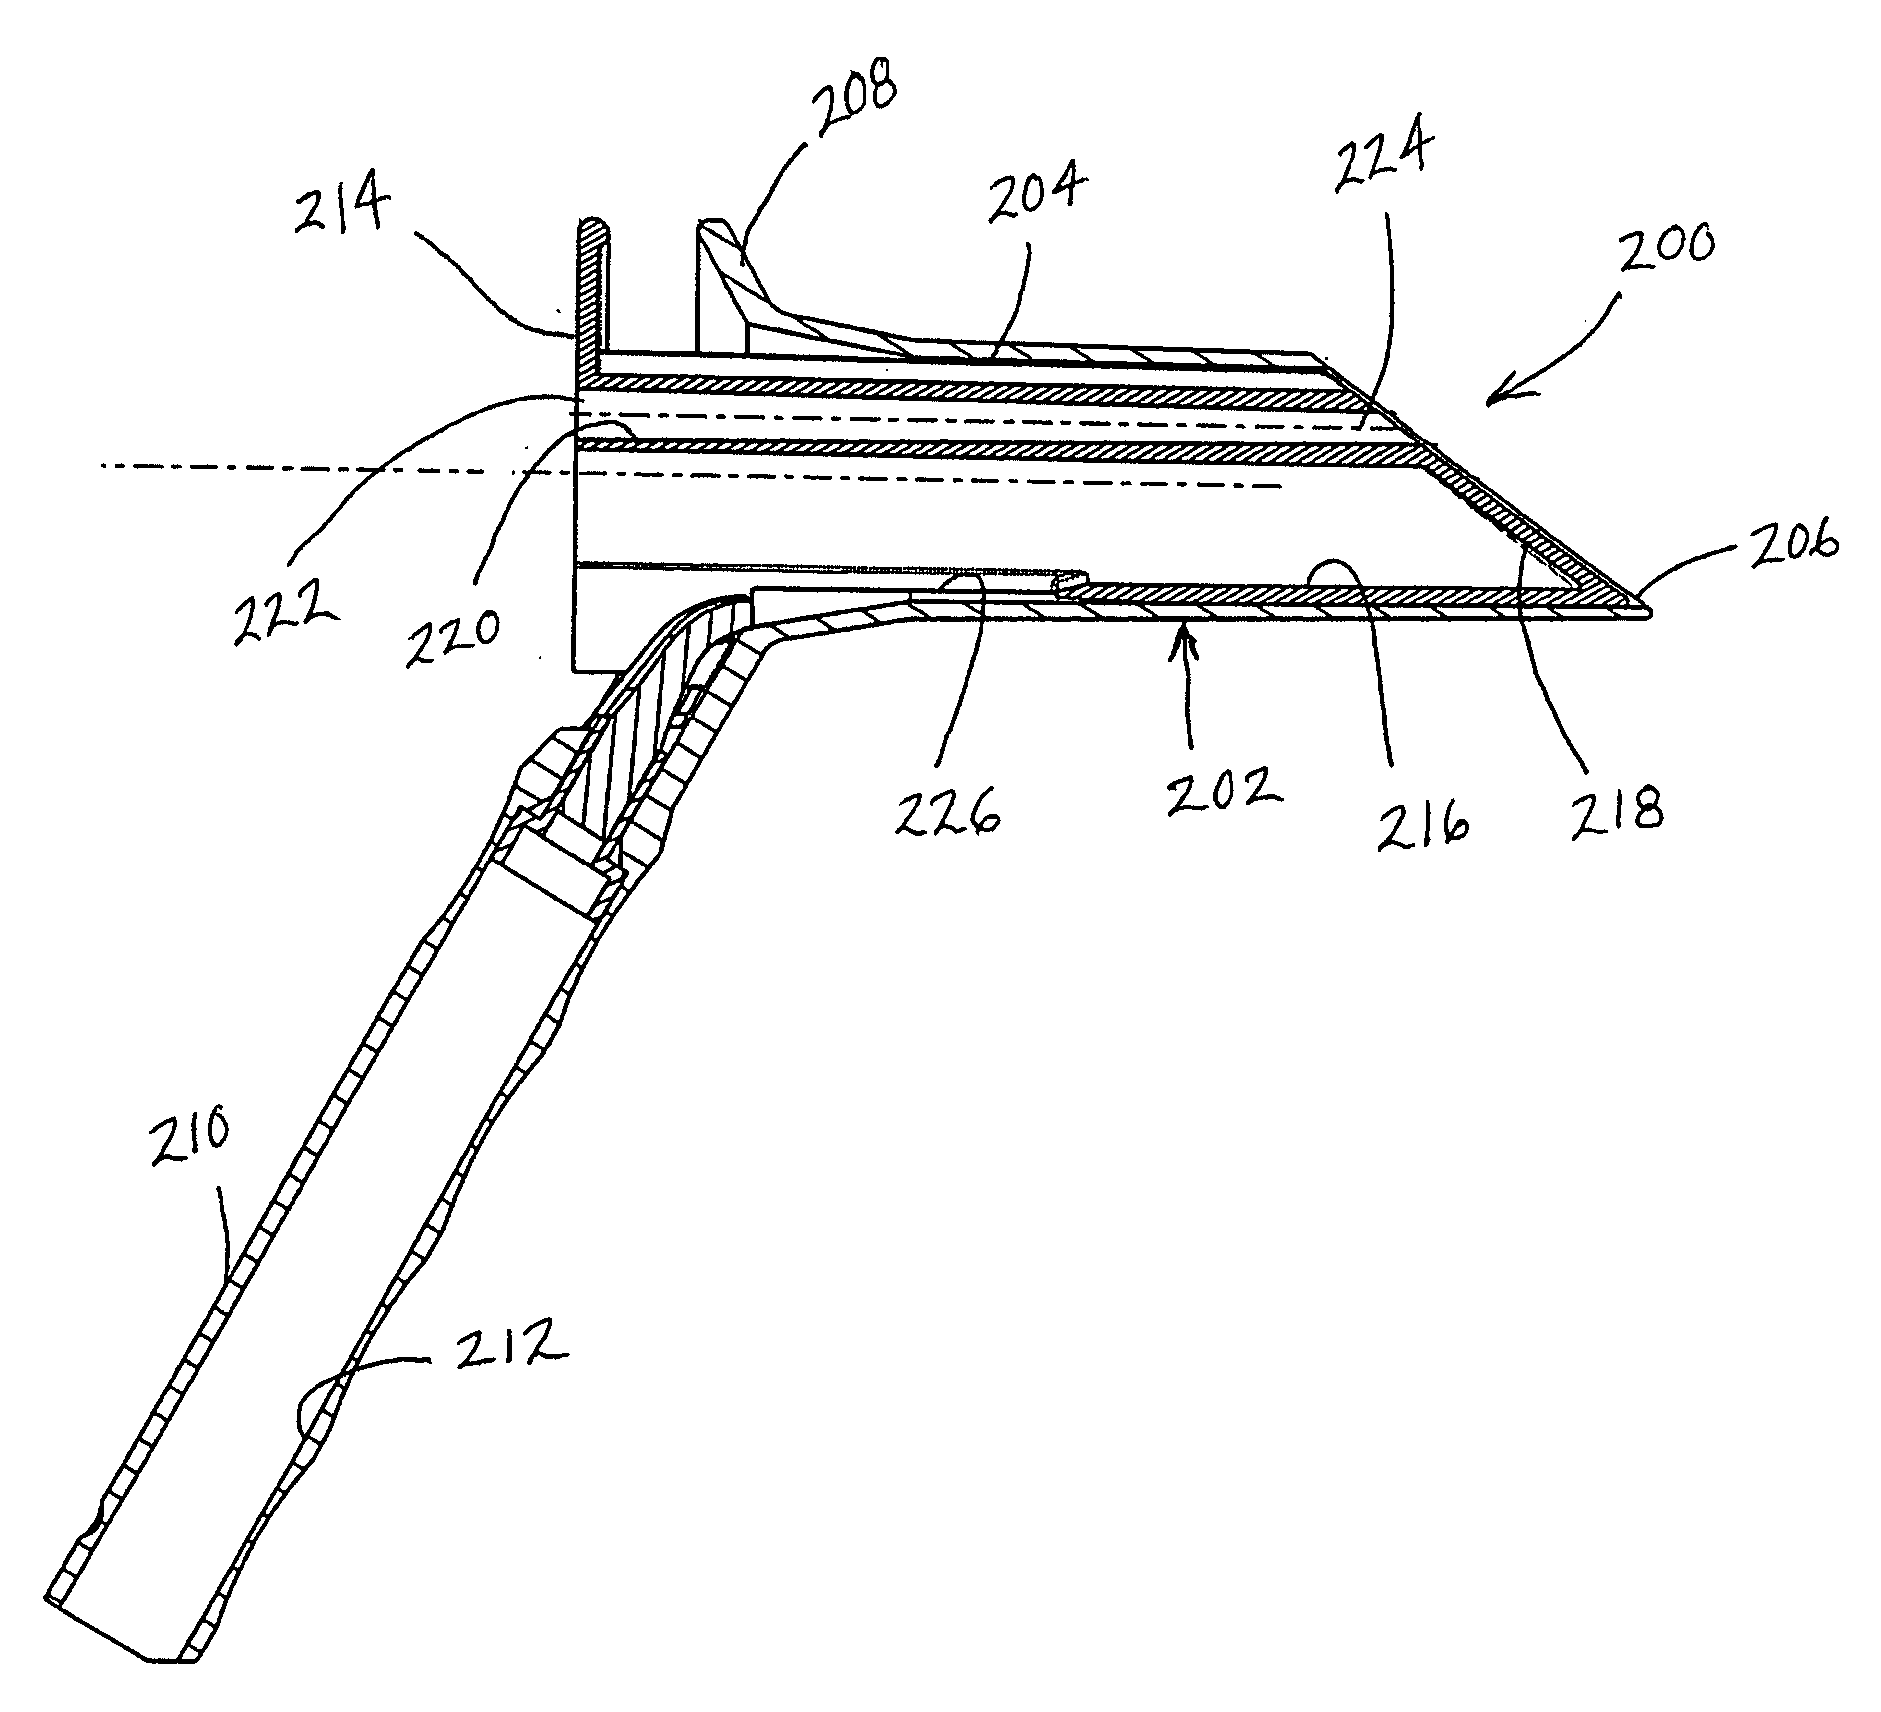 System and Method for Treating Hemorrhoids